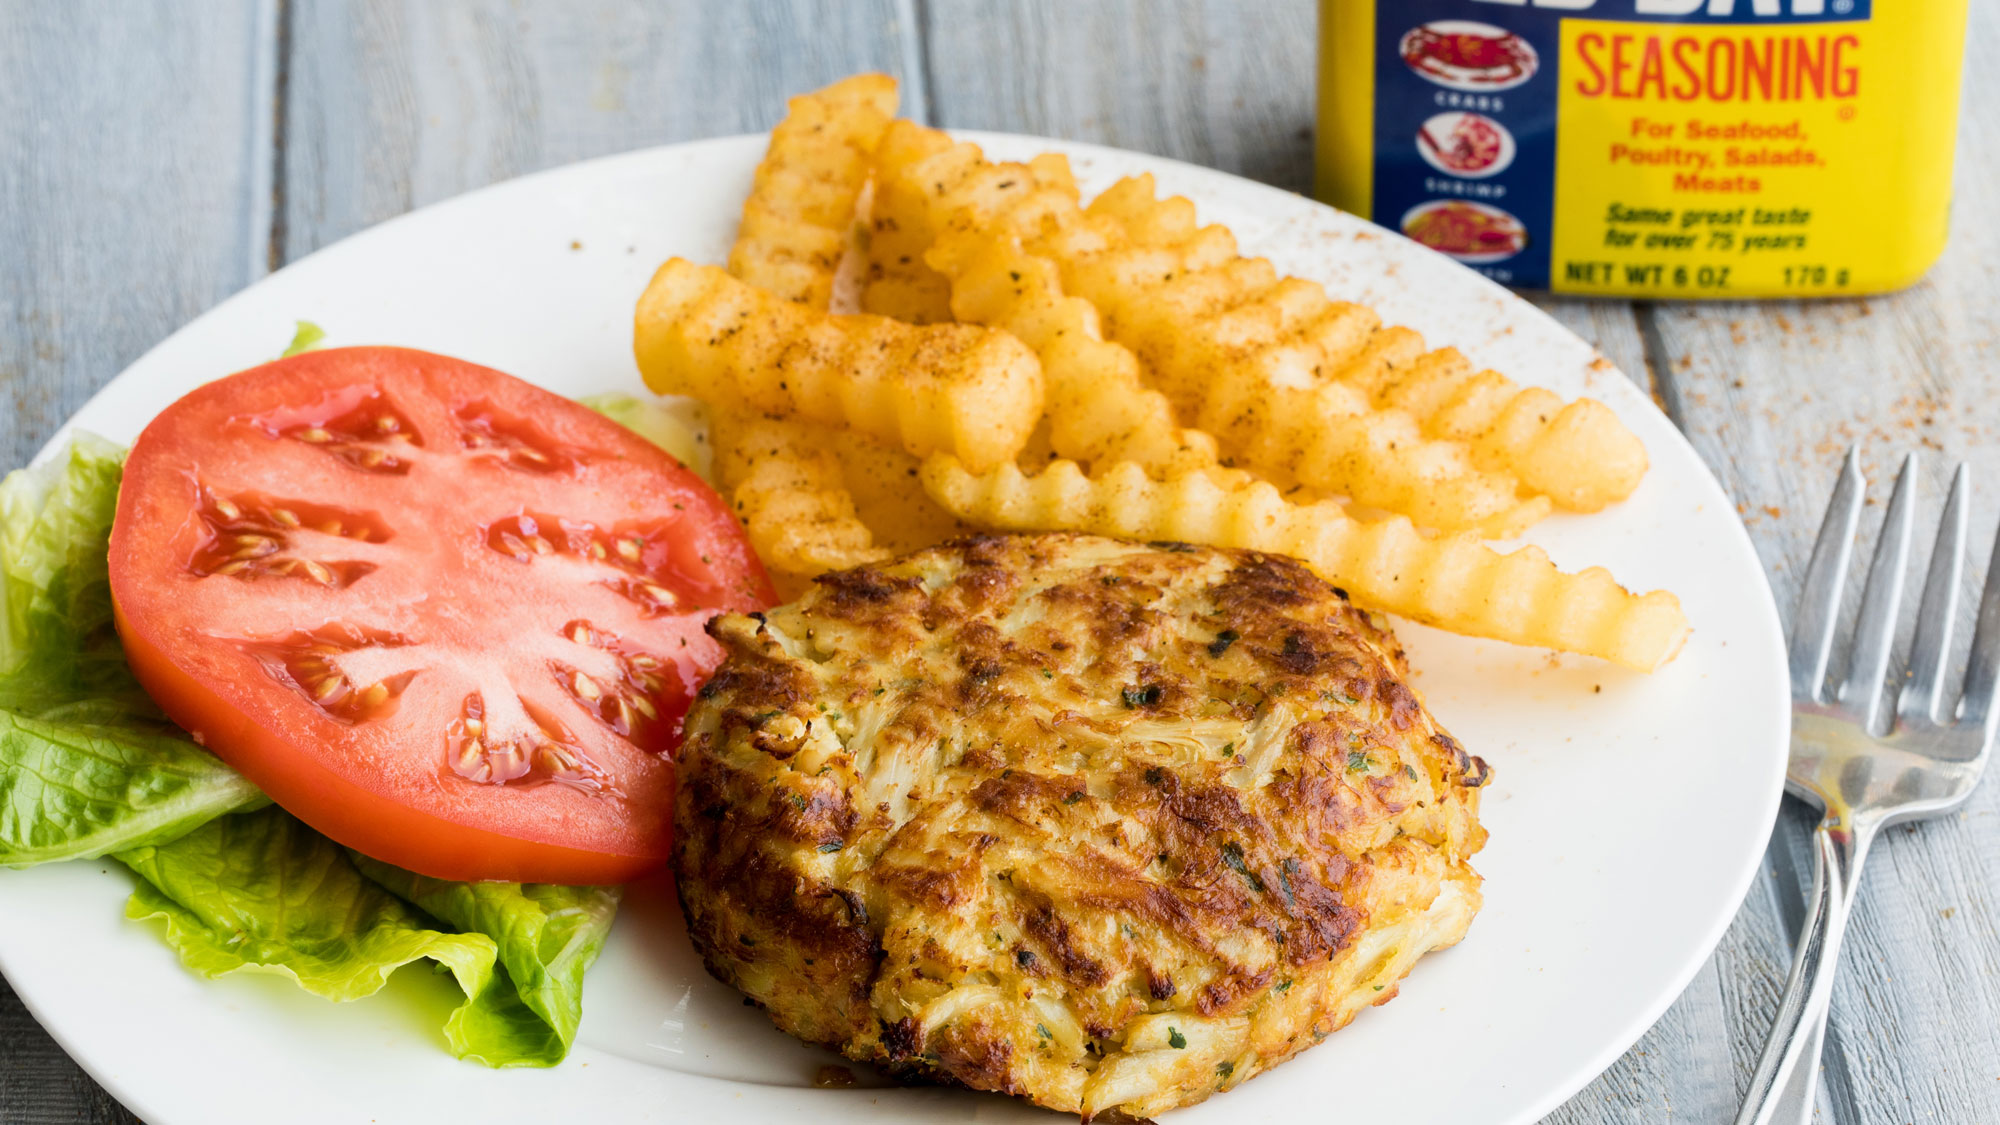 classic_old_bay_crab_cakes_2000x1125.jpg